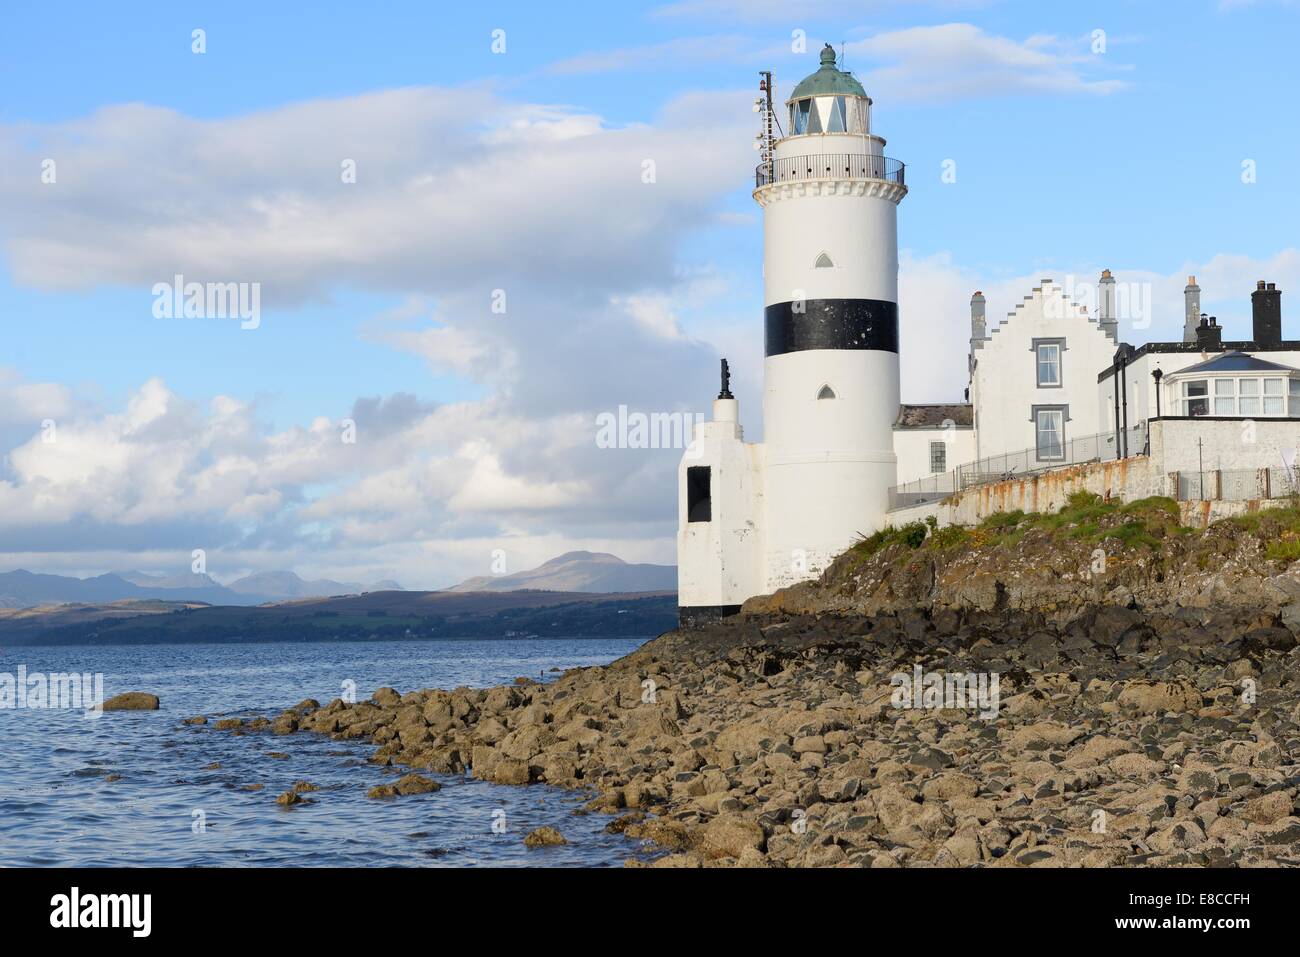 Automated lighthouse protecting the Gantocks on the river Clyde at Gourock, Inverclyde, Scotland Stock Photo